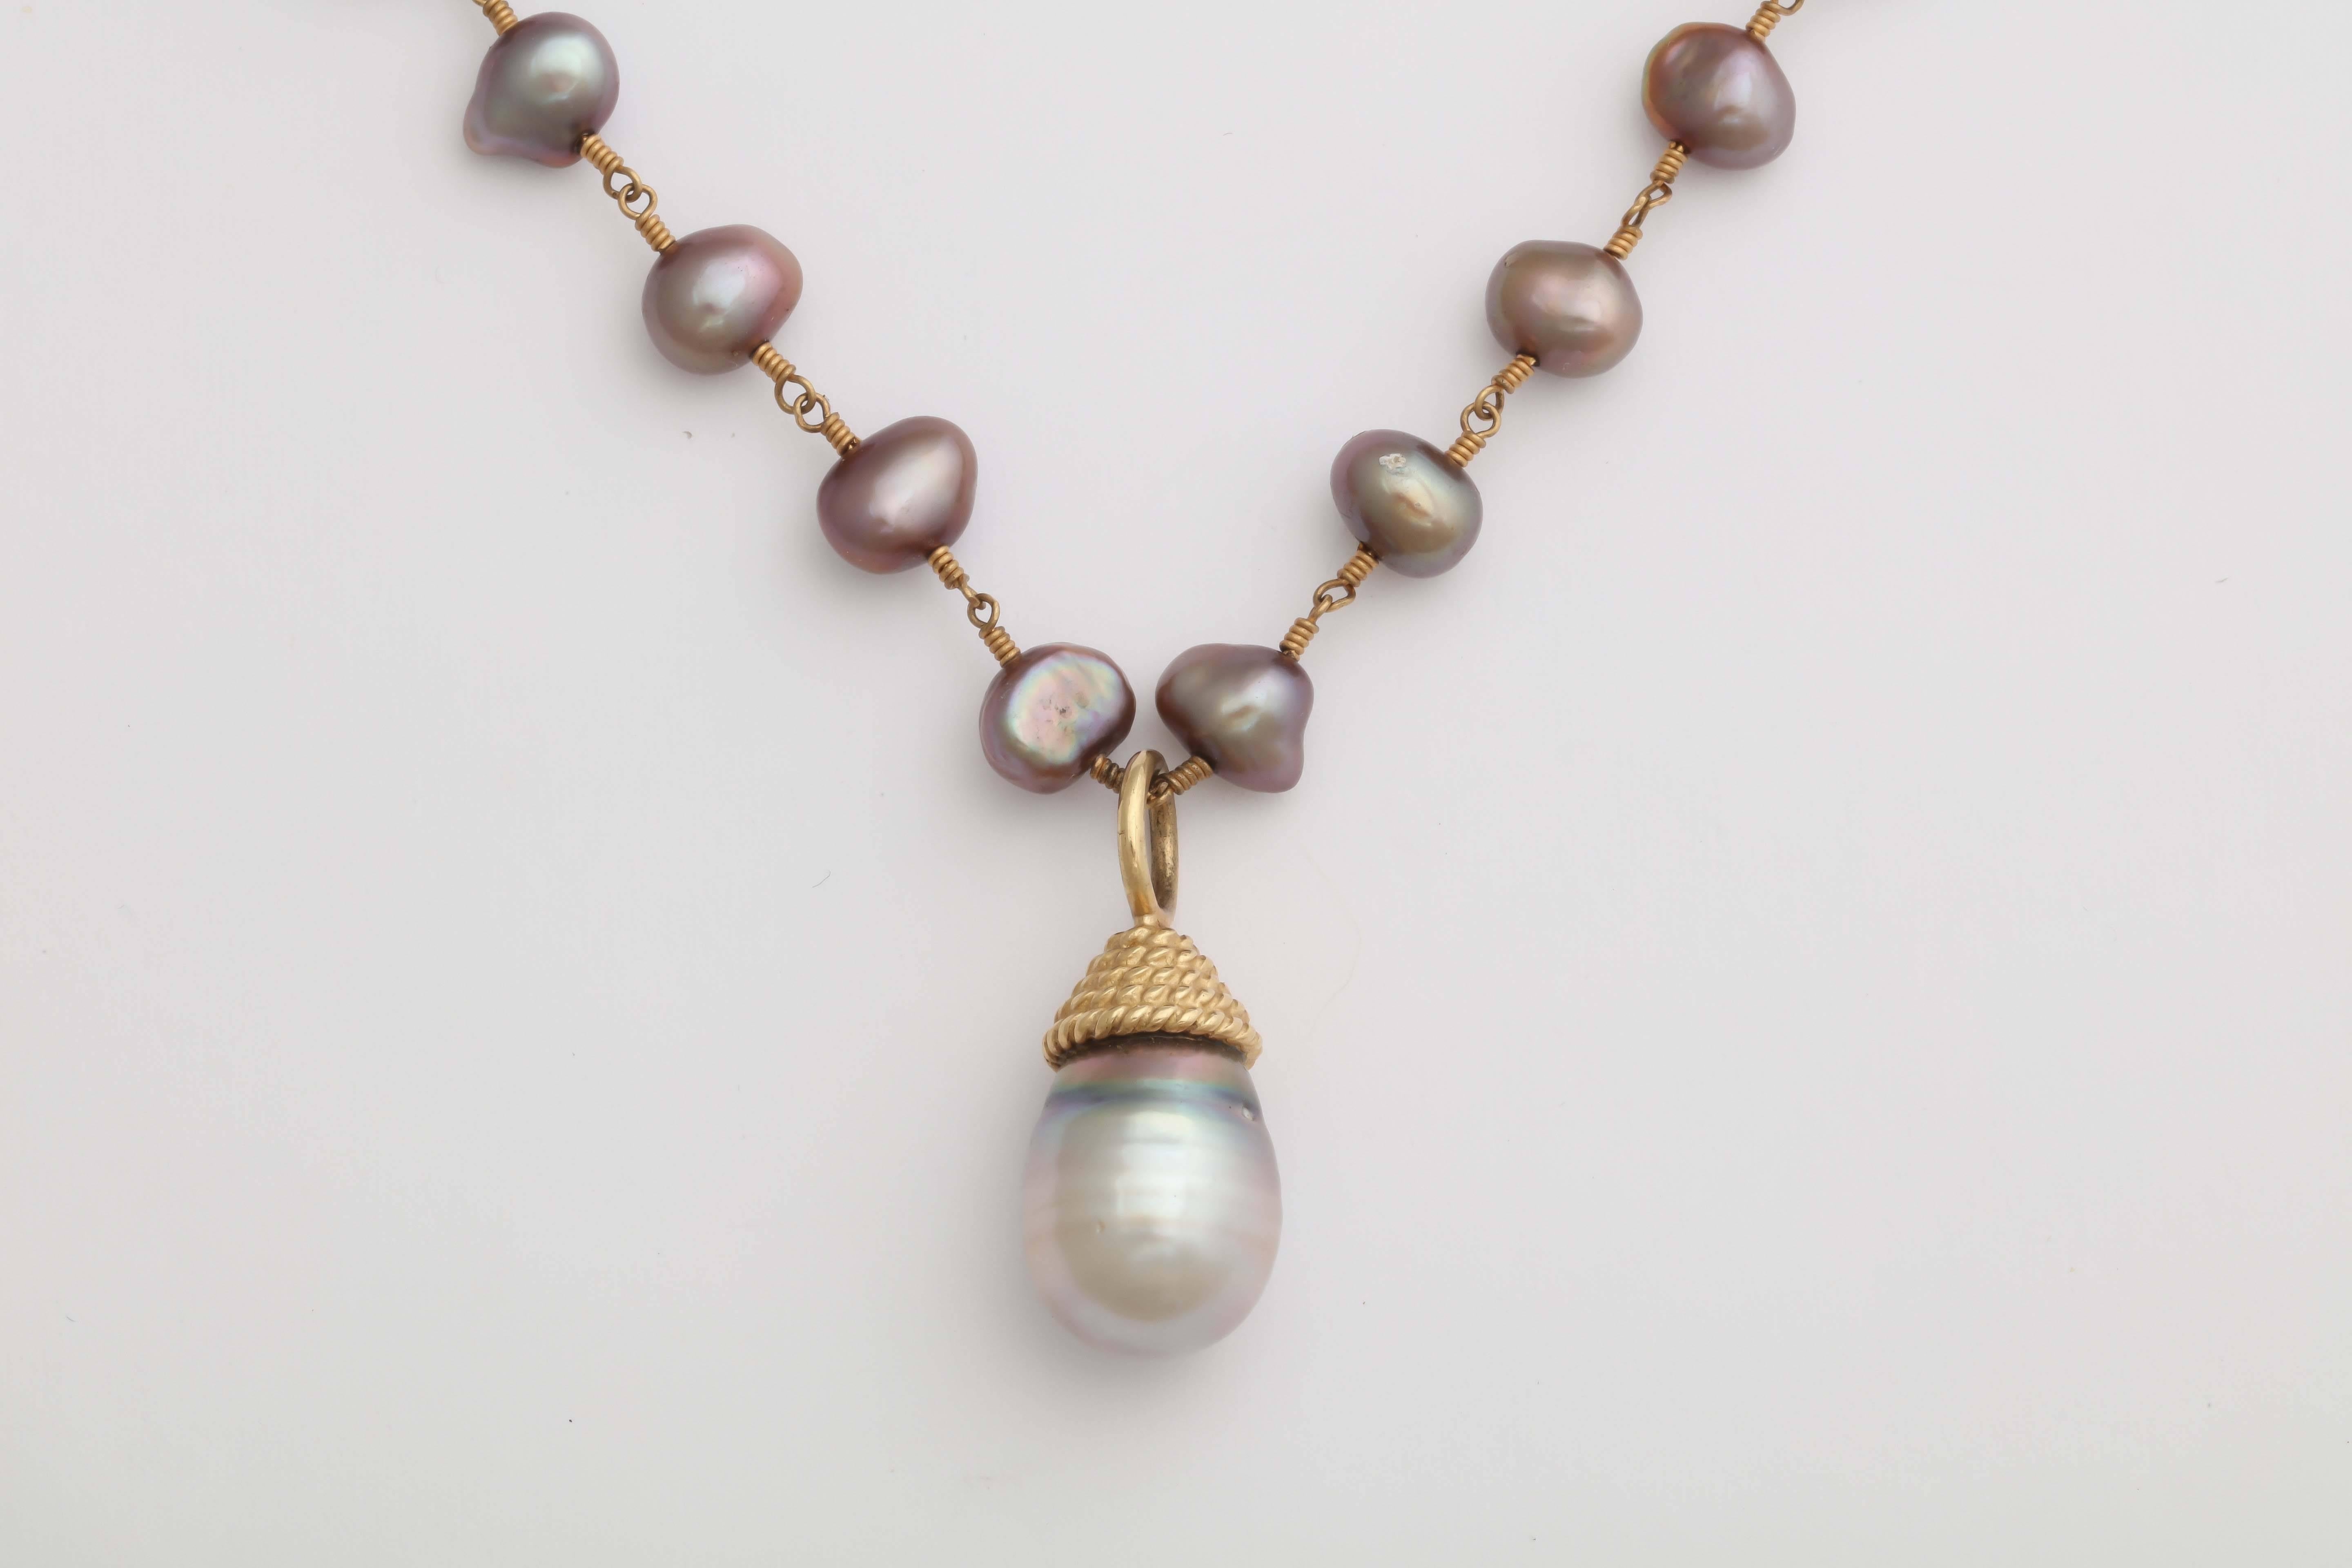 Great gray Tahitian pearl  wrapped with a 14 kt gold Twisted wire cap pendant  necklace.
Holding the drop pearl is a 14 kt wire fresh water pearl chain. Total length 16.5 in. It can be made longer at your request.. The necklace is finished with a